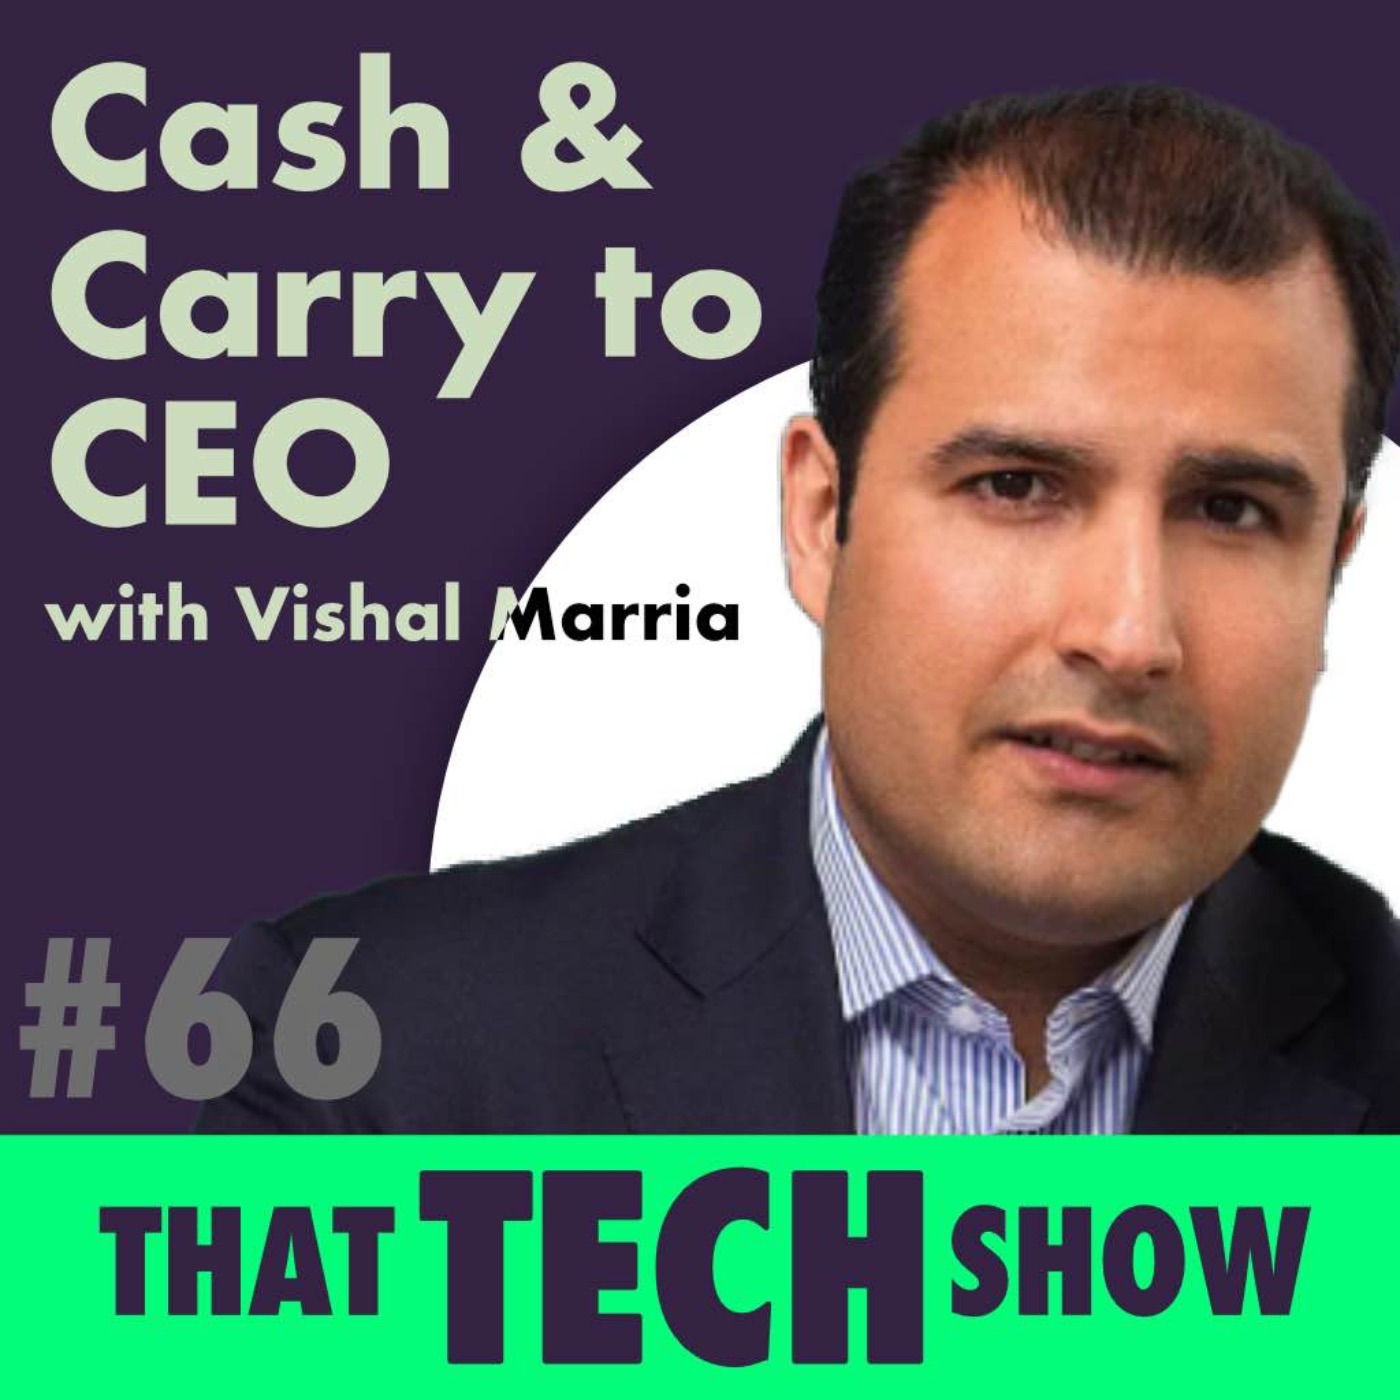 Episode 66 - Cash & Carry to CEO with Vishal Marria